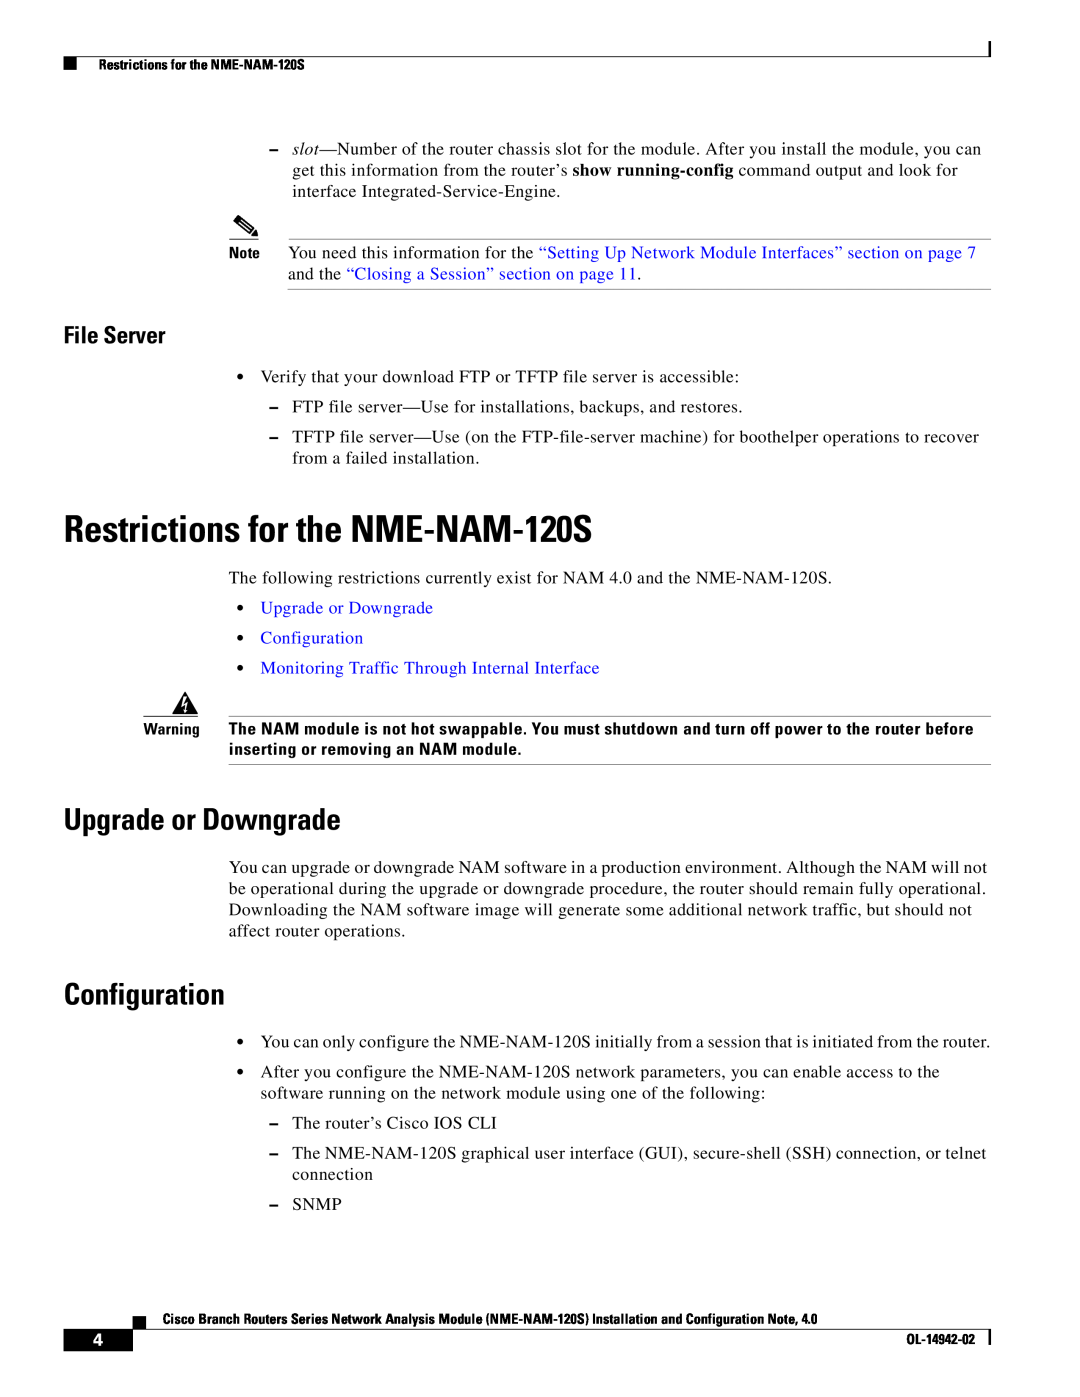 Cisco Systems SMNMADPTR manual Restrictions for the NME-NAM-120S, Upgrade or Downgrade, Configuration, File Server 